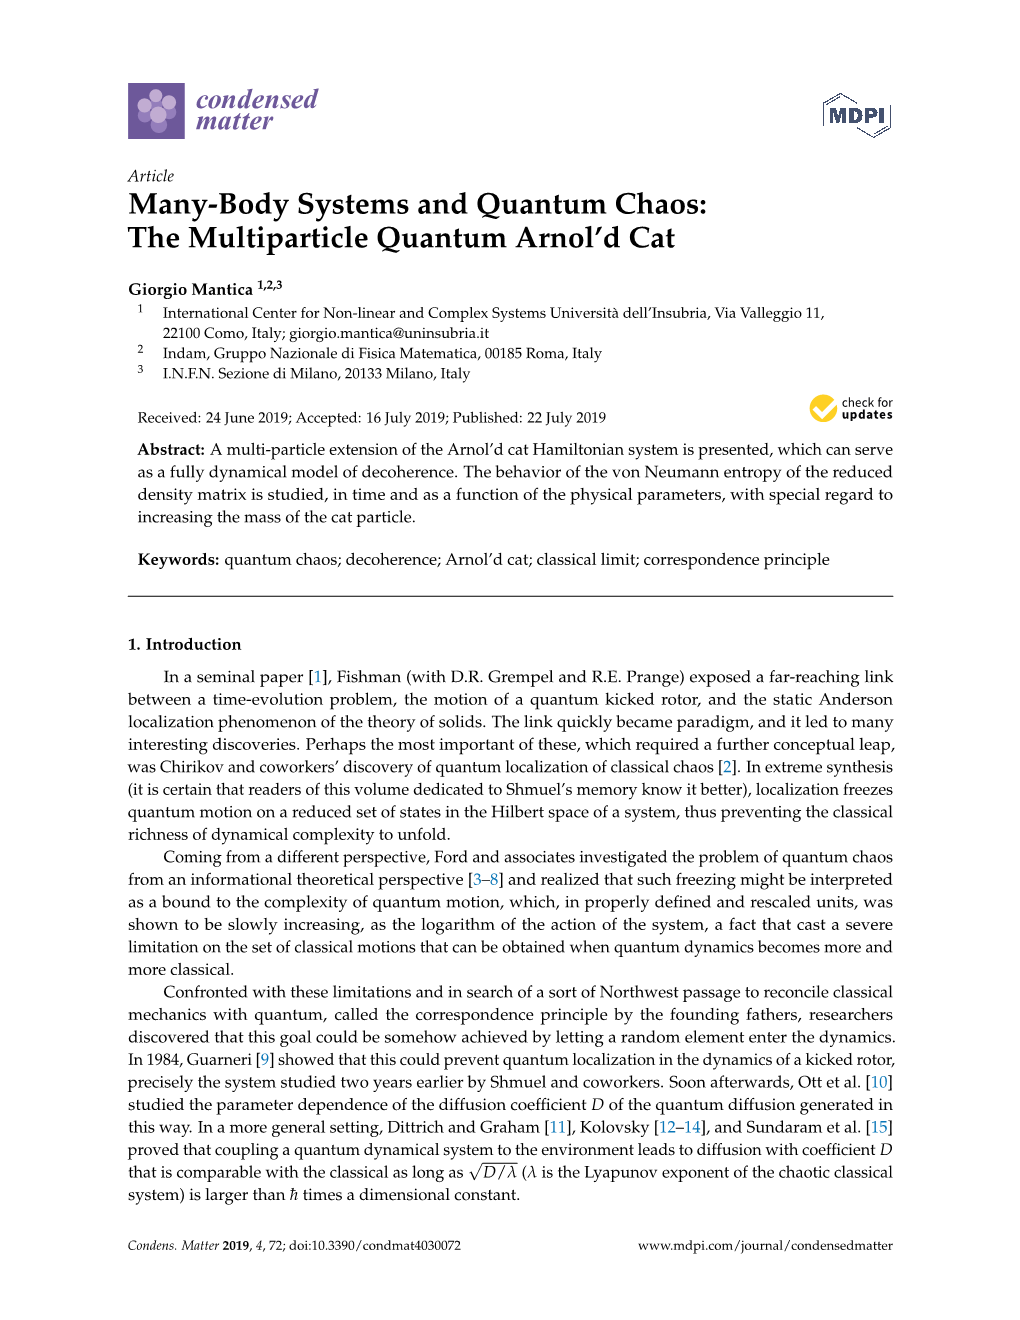 Many-Body Systems and Quantum Chaos: the Multiparticle Quantum Arnol’D Cat